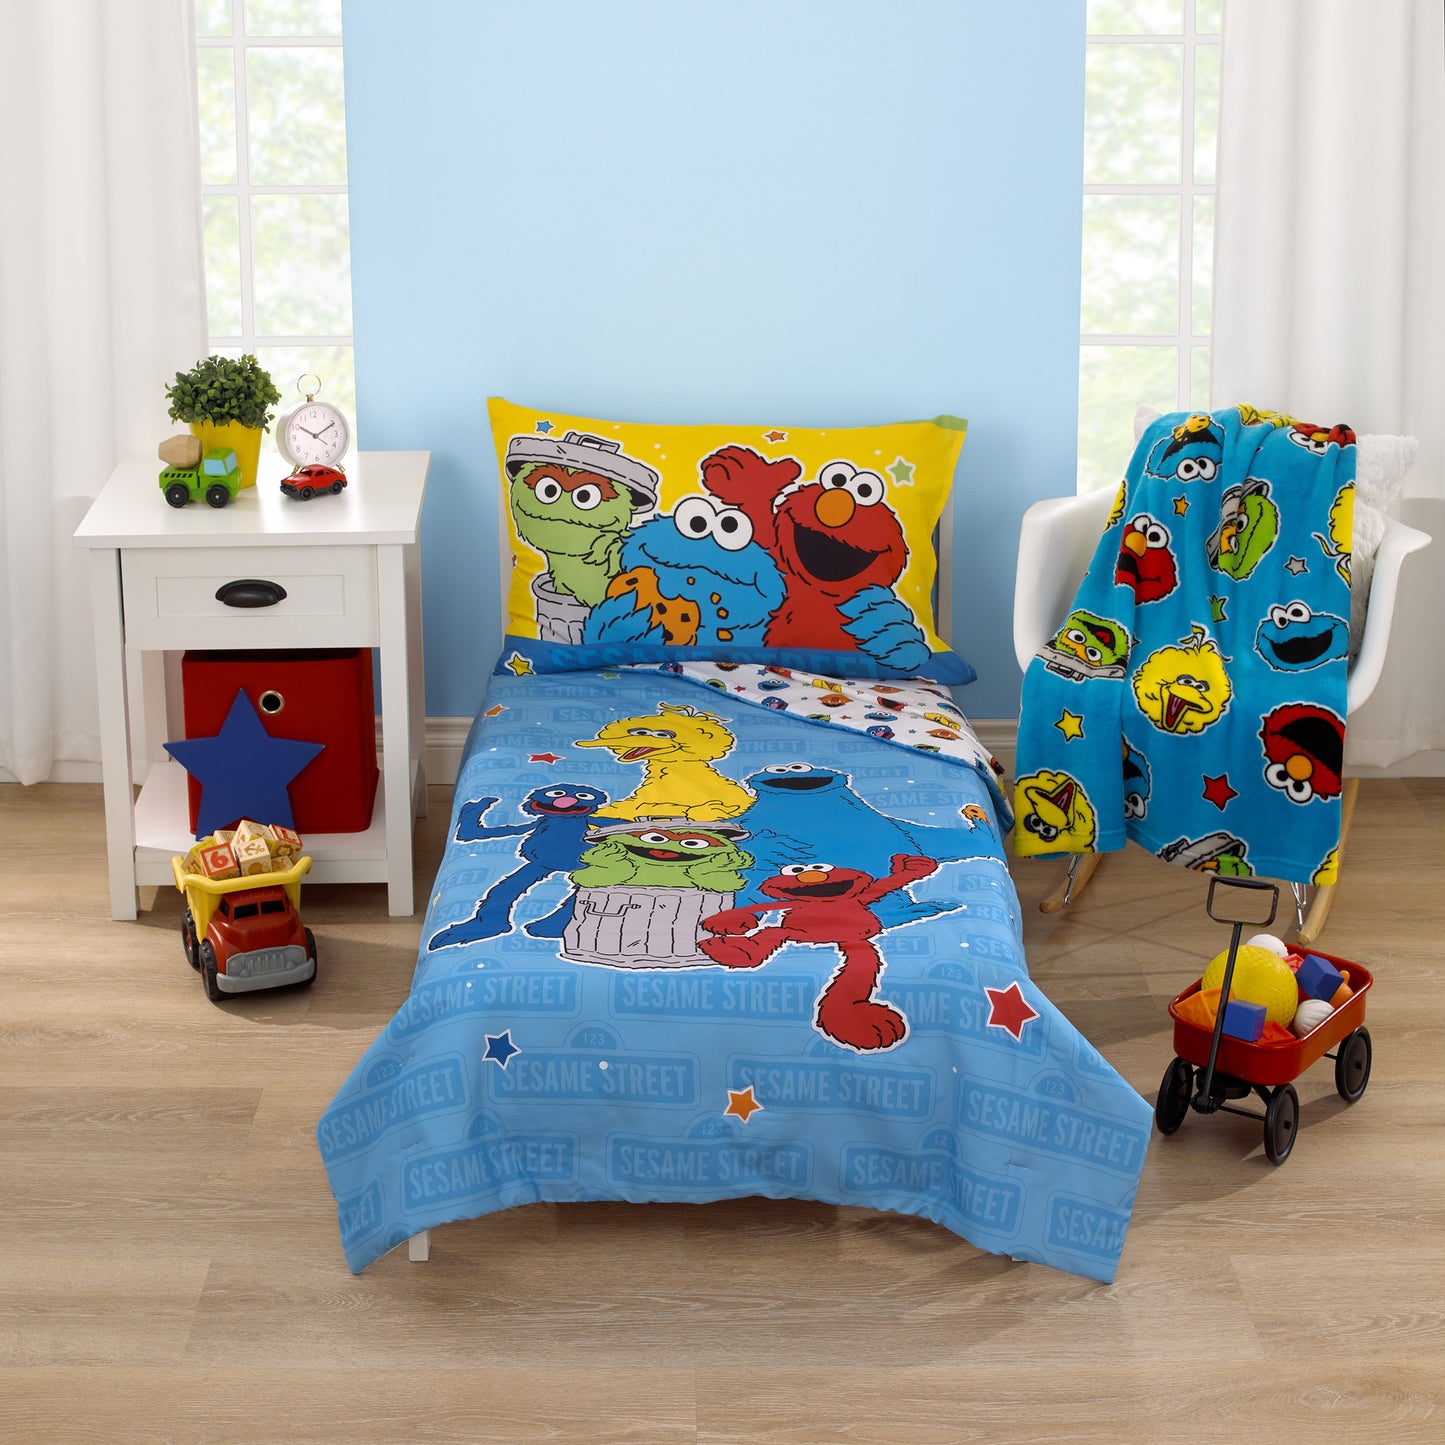 Sesame Street Come and Play Blue, Green, Red and Yellow, Elmo, Big Bird, Cookie Monster, Grover, and Oscar the Grouch 4 Piece Toddler Bed Set - Comforter, Fitted Bottom Sheet, Flat Top Sheet, and Reversible Pillowcase